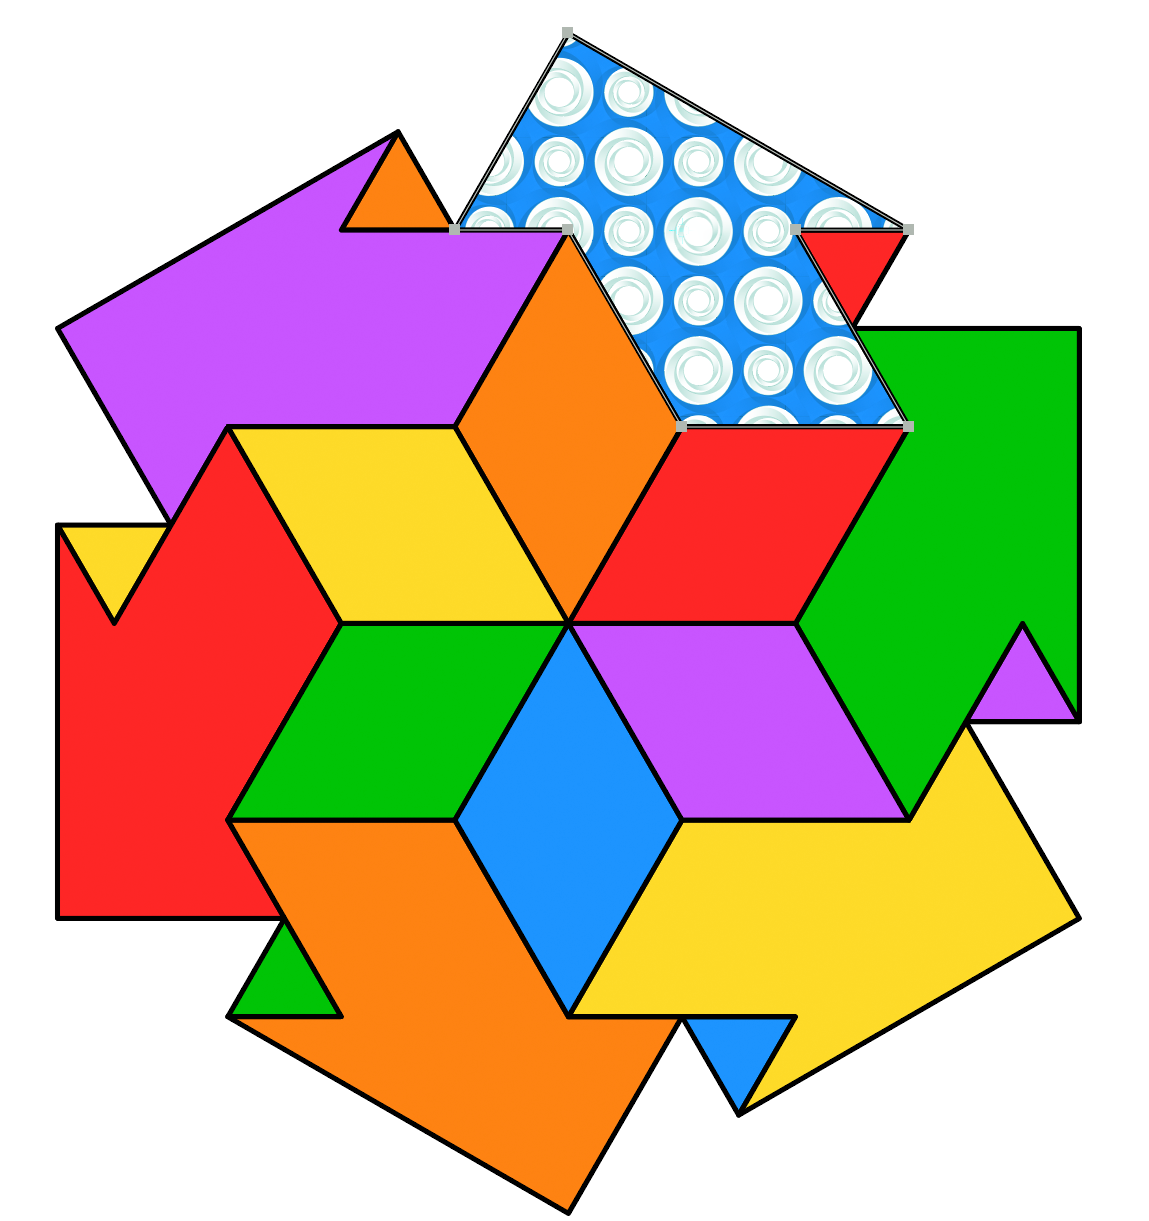 A hug of intertwining arrows with a patterned example element